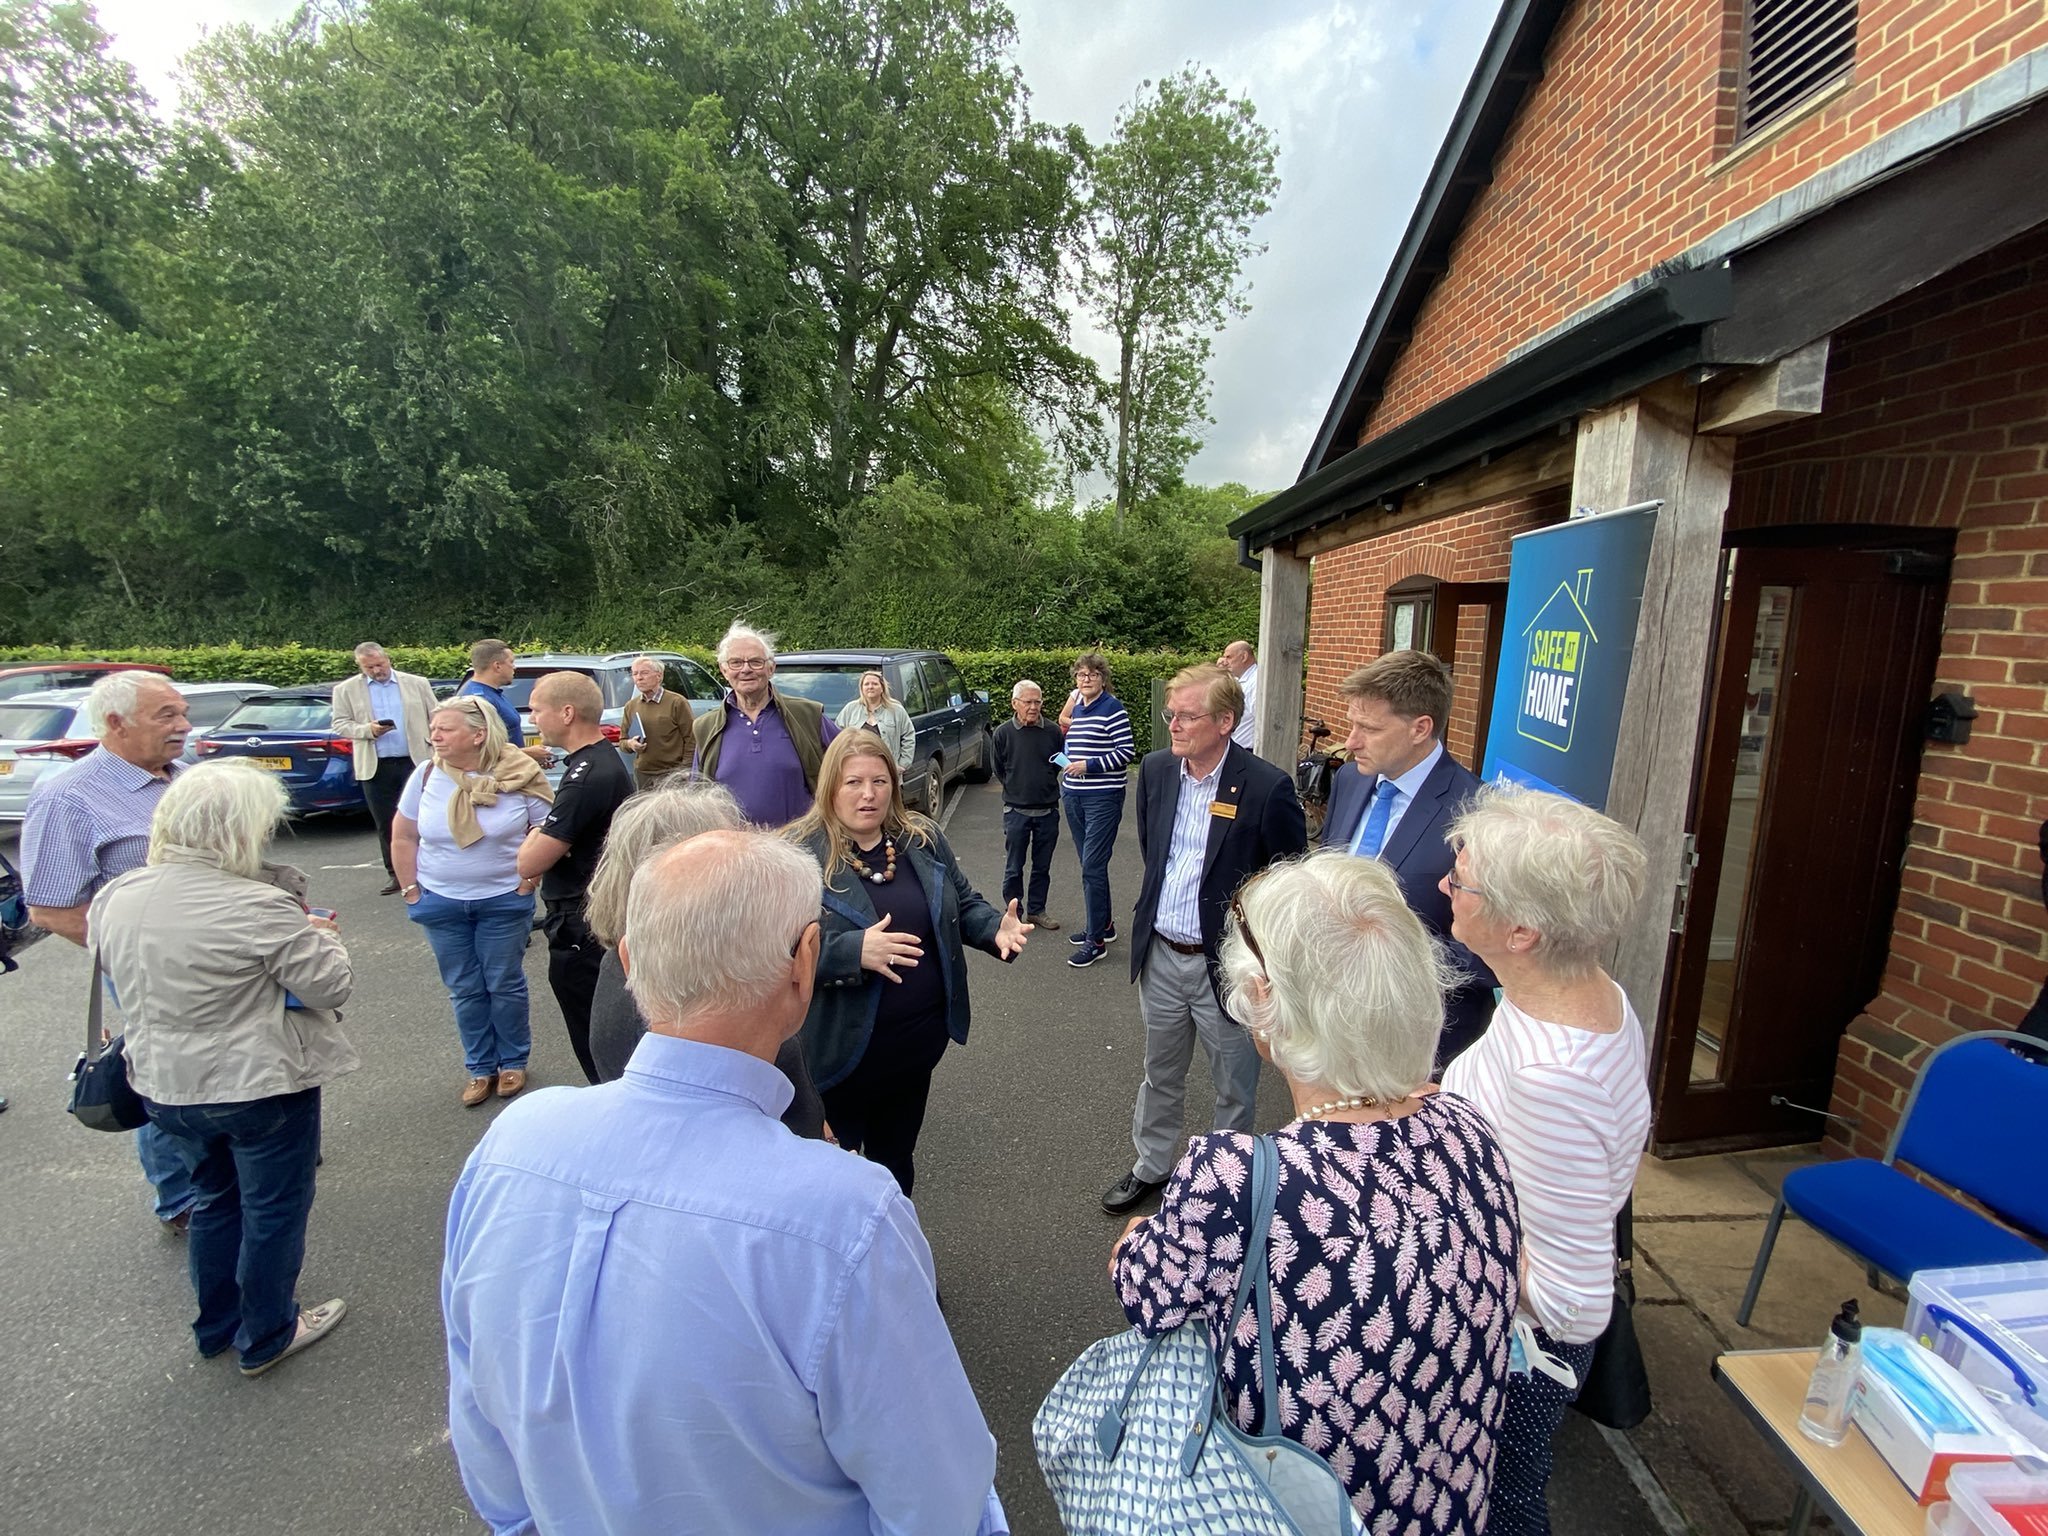 New Police and crime Commissioner Donna Jones speaking to the public at East Stratton surgery yesterday evening. Photo: PCC